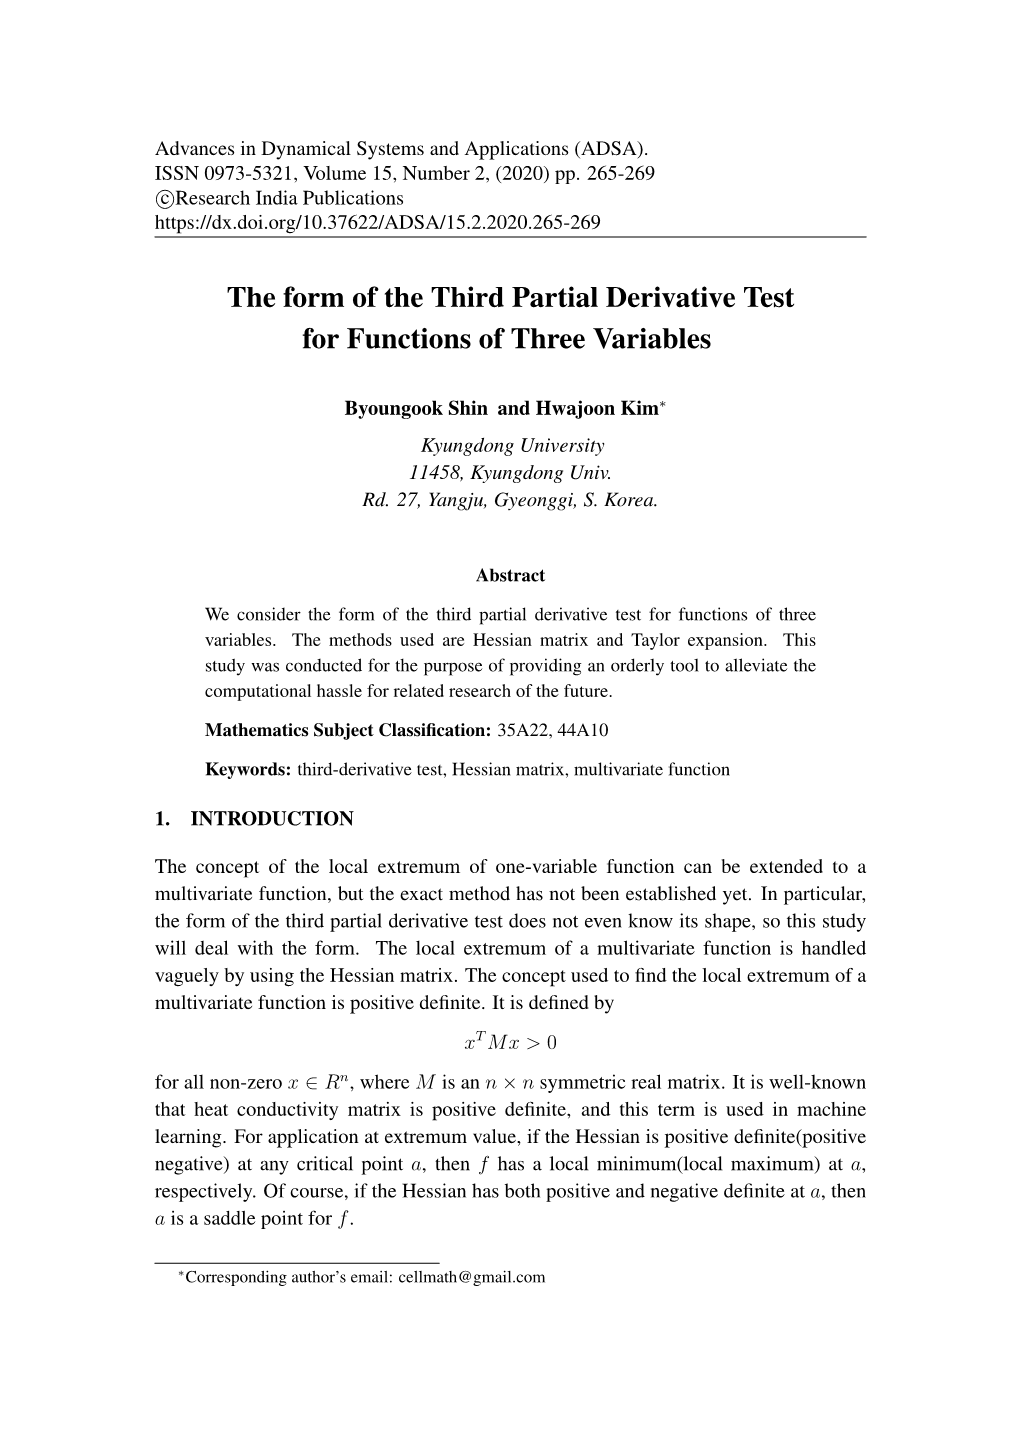 The Form of the Third Partial Derivative Test for Functions of Three Variables